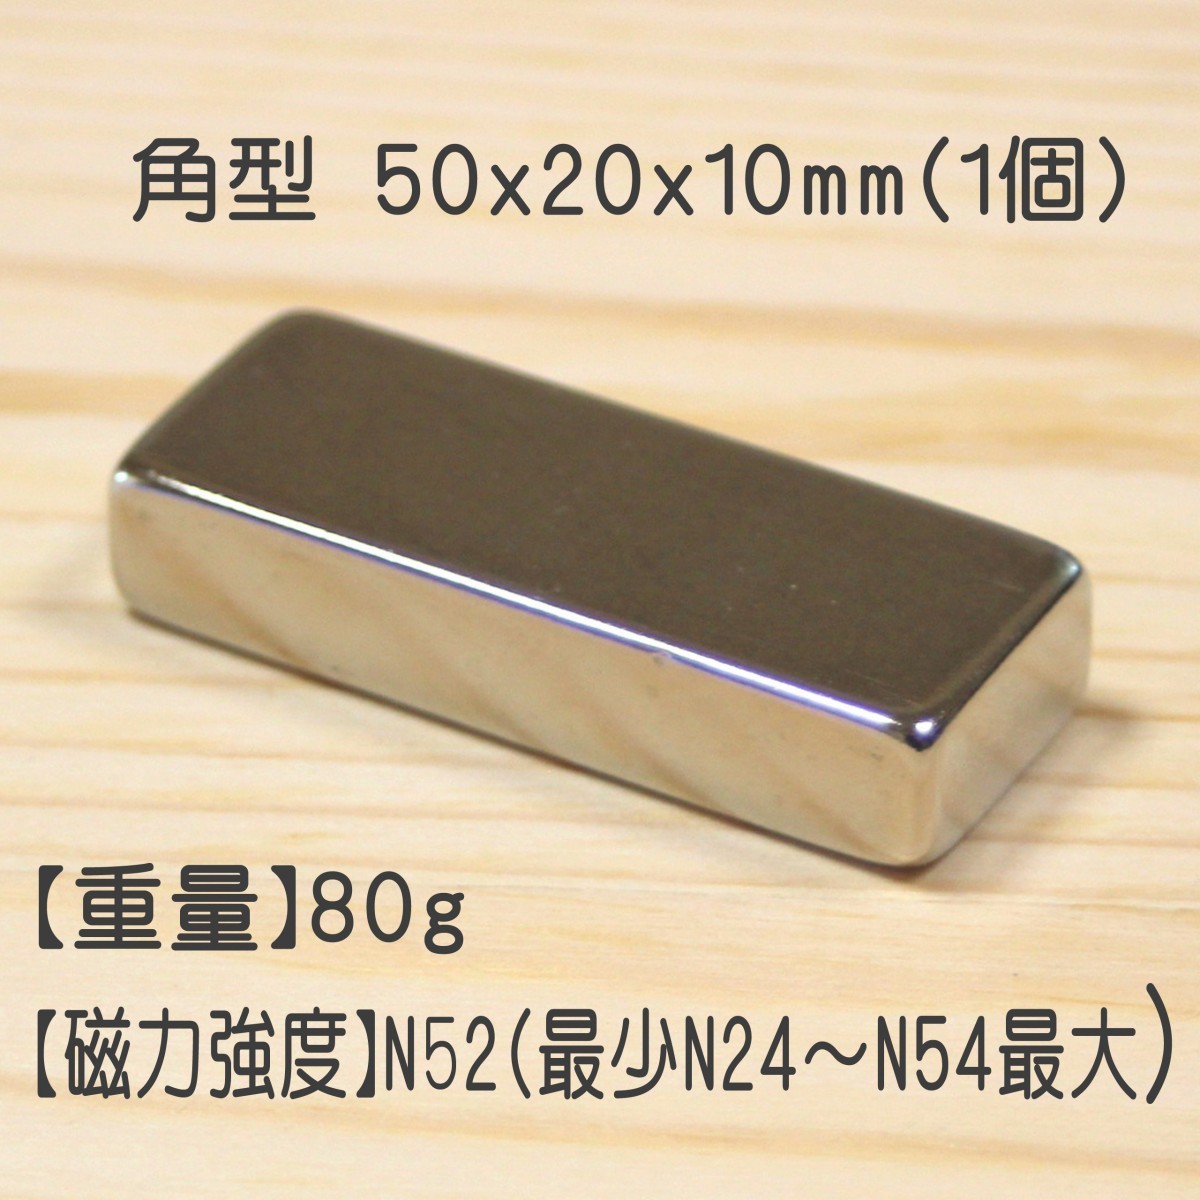  Neo Jim magnet rectangle rectangle 50x20x10mm 1 piece super powerful magnet thickness . large powerful permanent magnet neodymium magnet DIY Sunday large . construction experiment research raw materials I der practical use convenience 